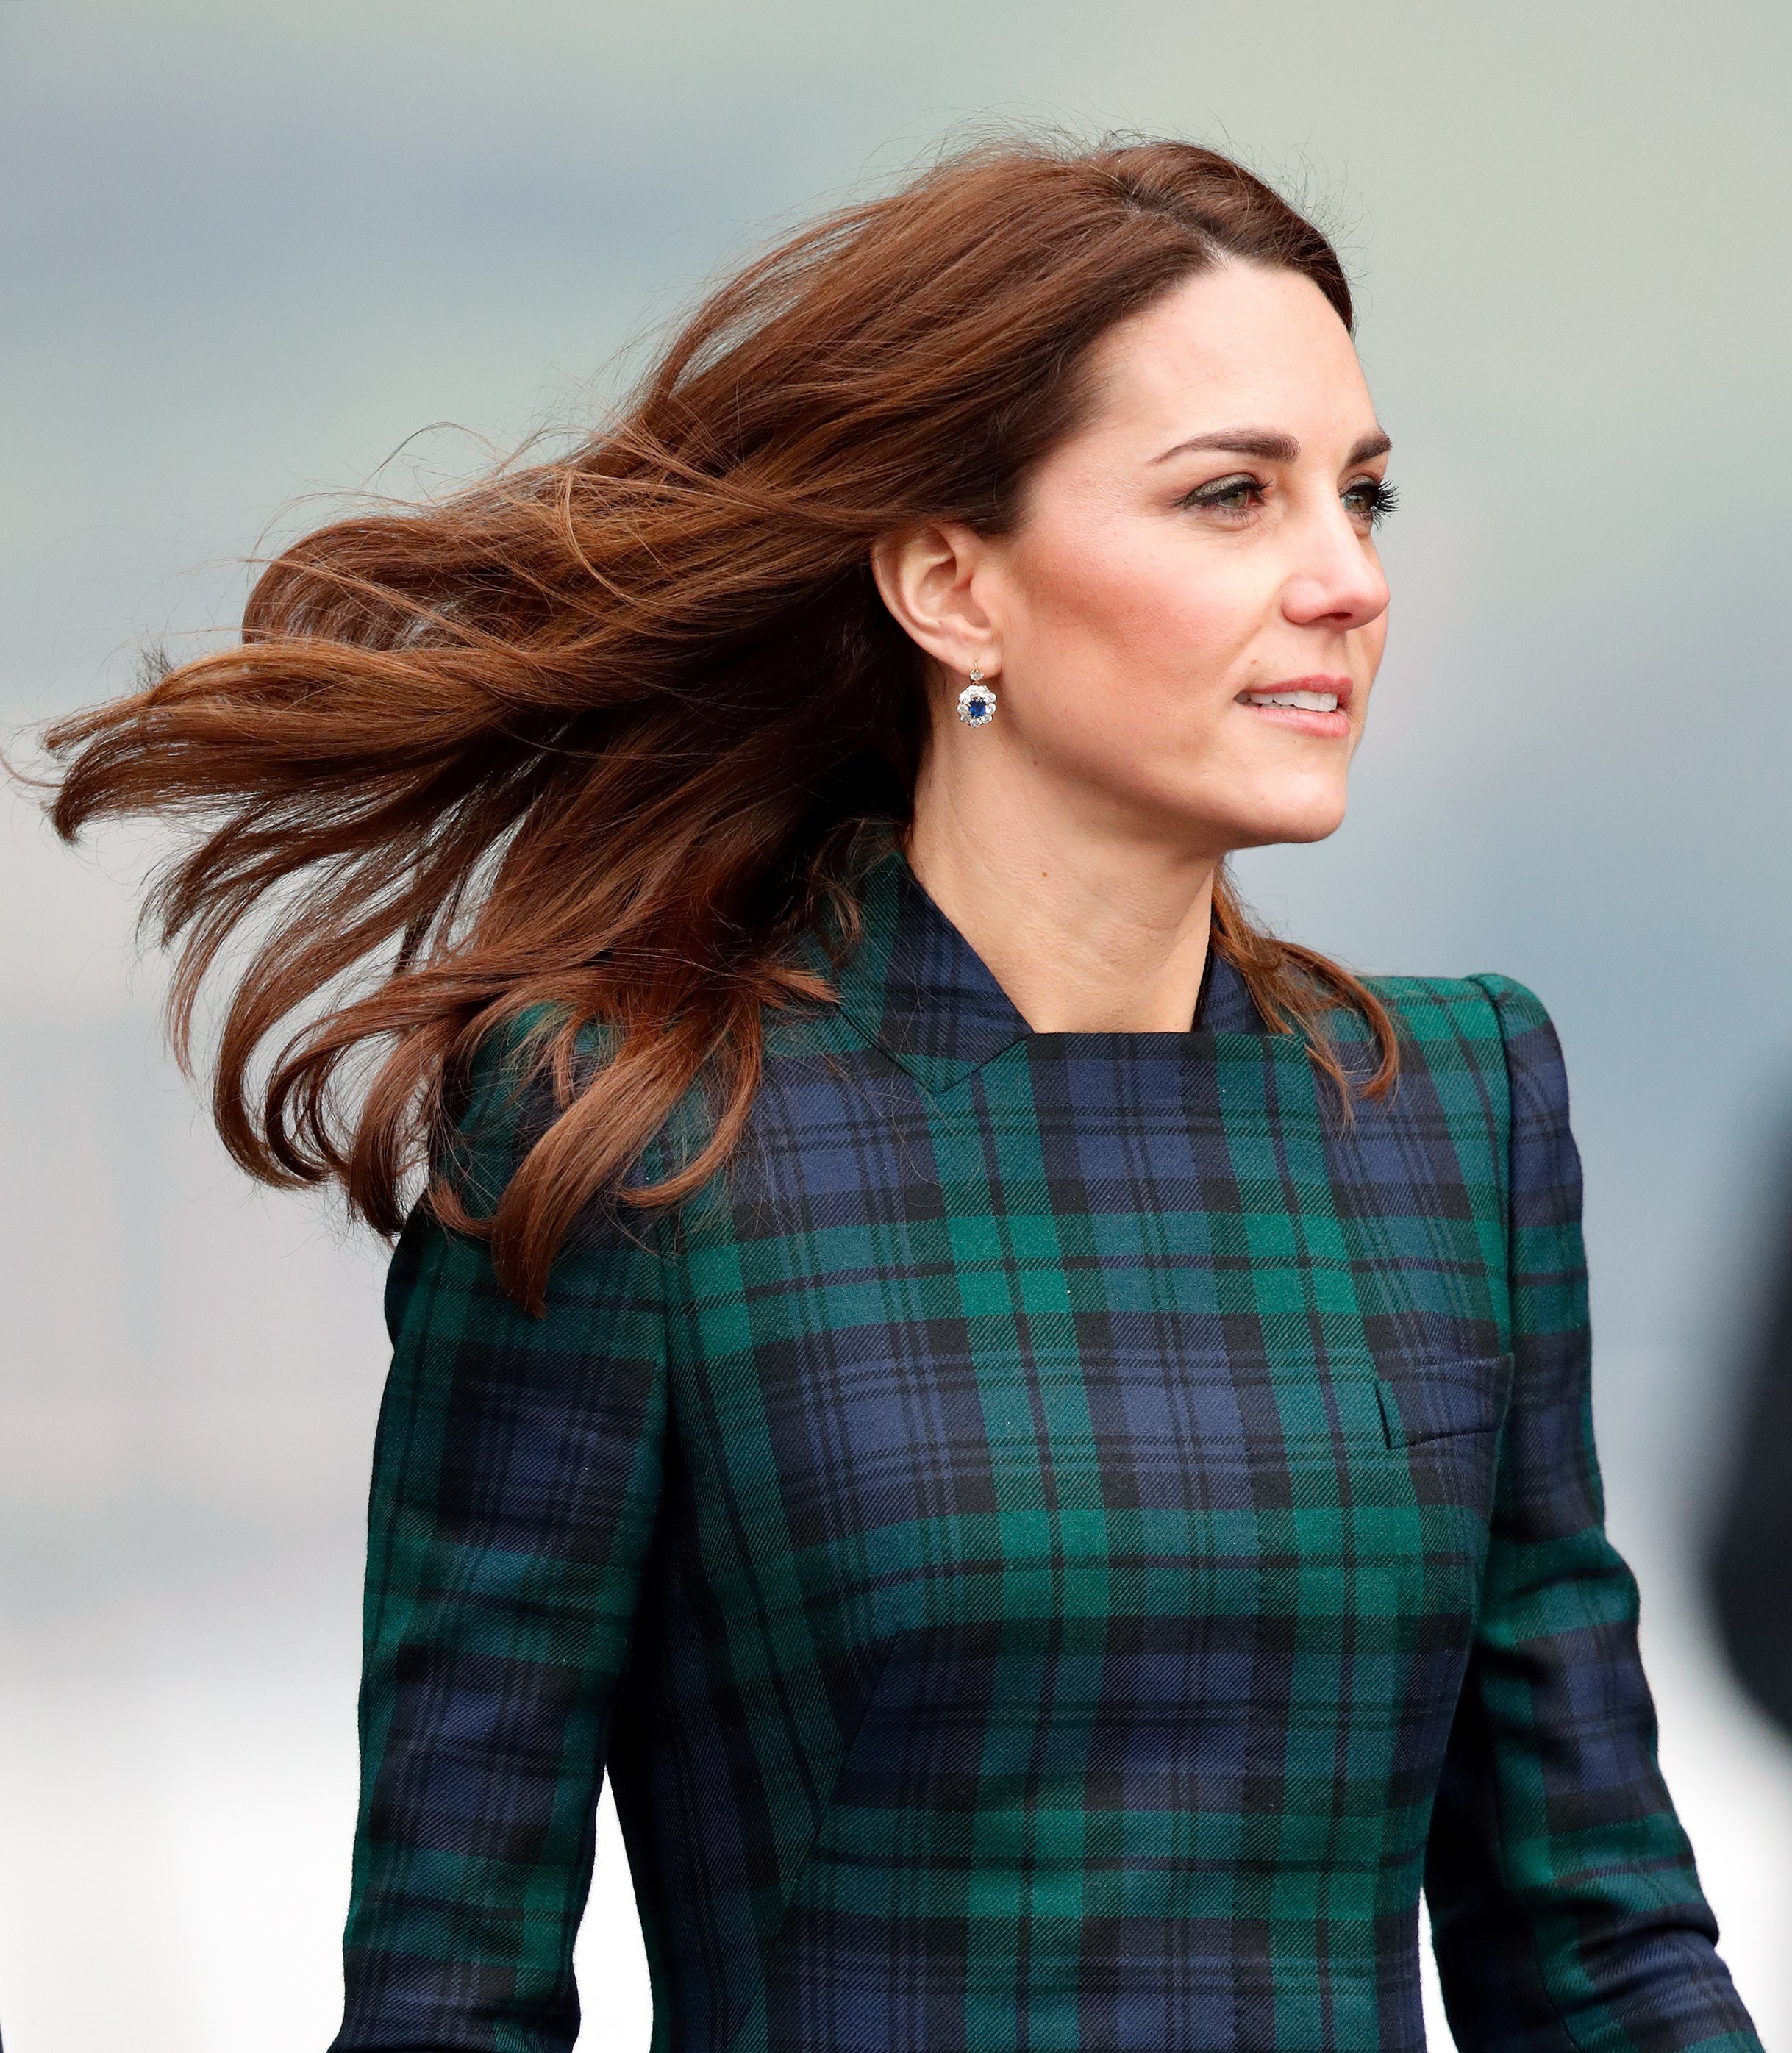 Kate Middleton's glowing hair | Photo: Getty Images